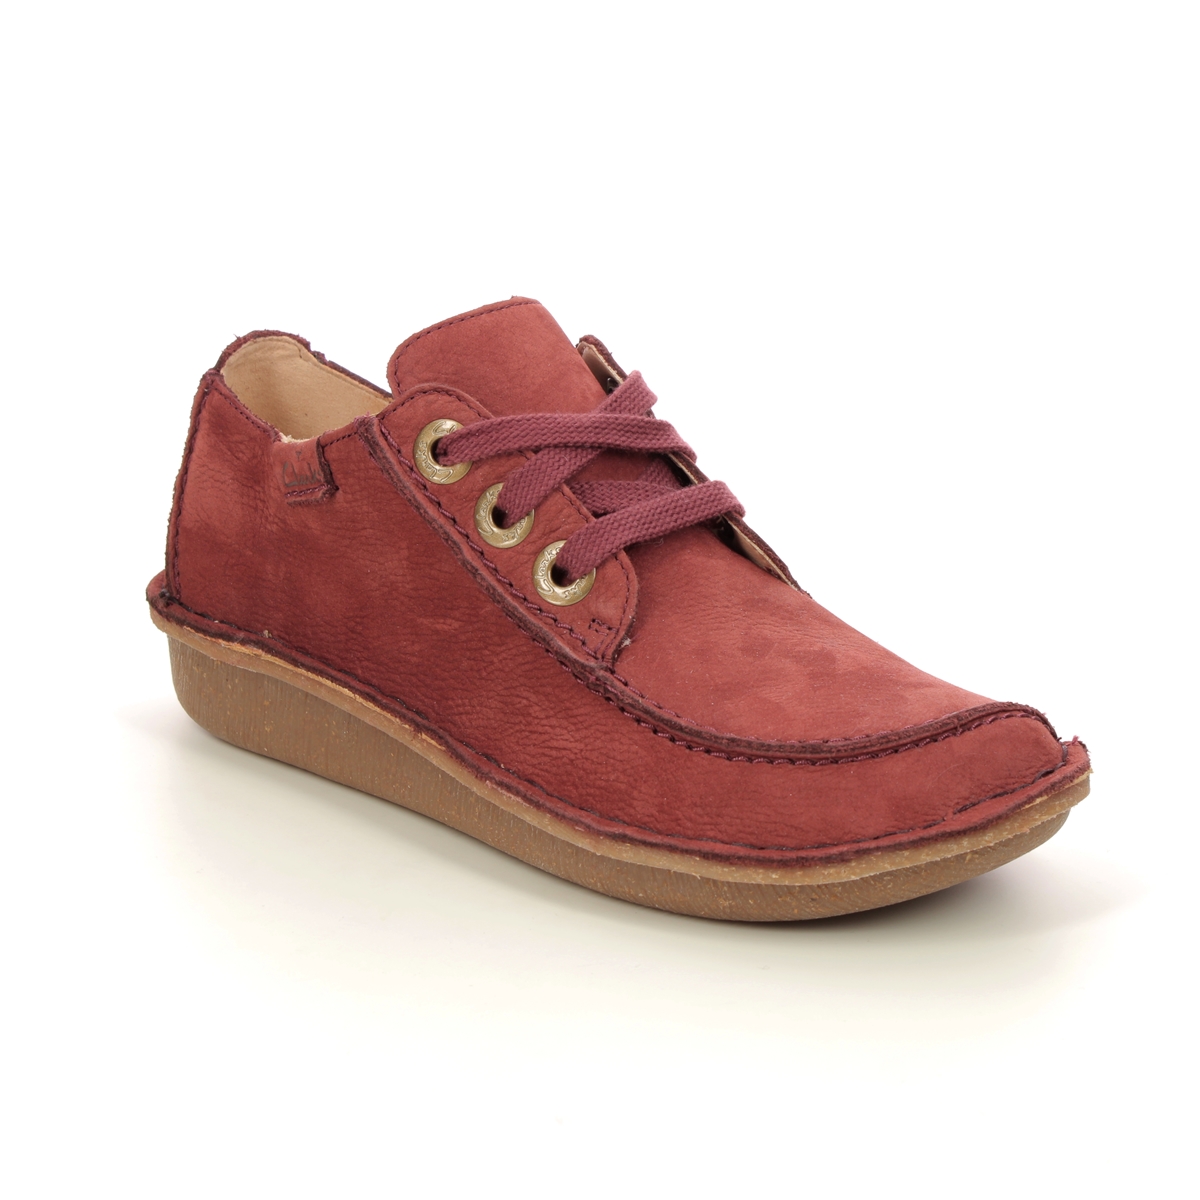 Clarks Funny Dream Fit Tan Nubuck lacing shoes